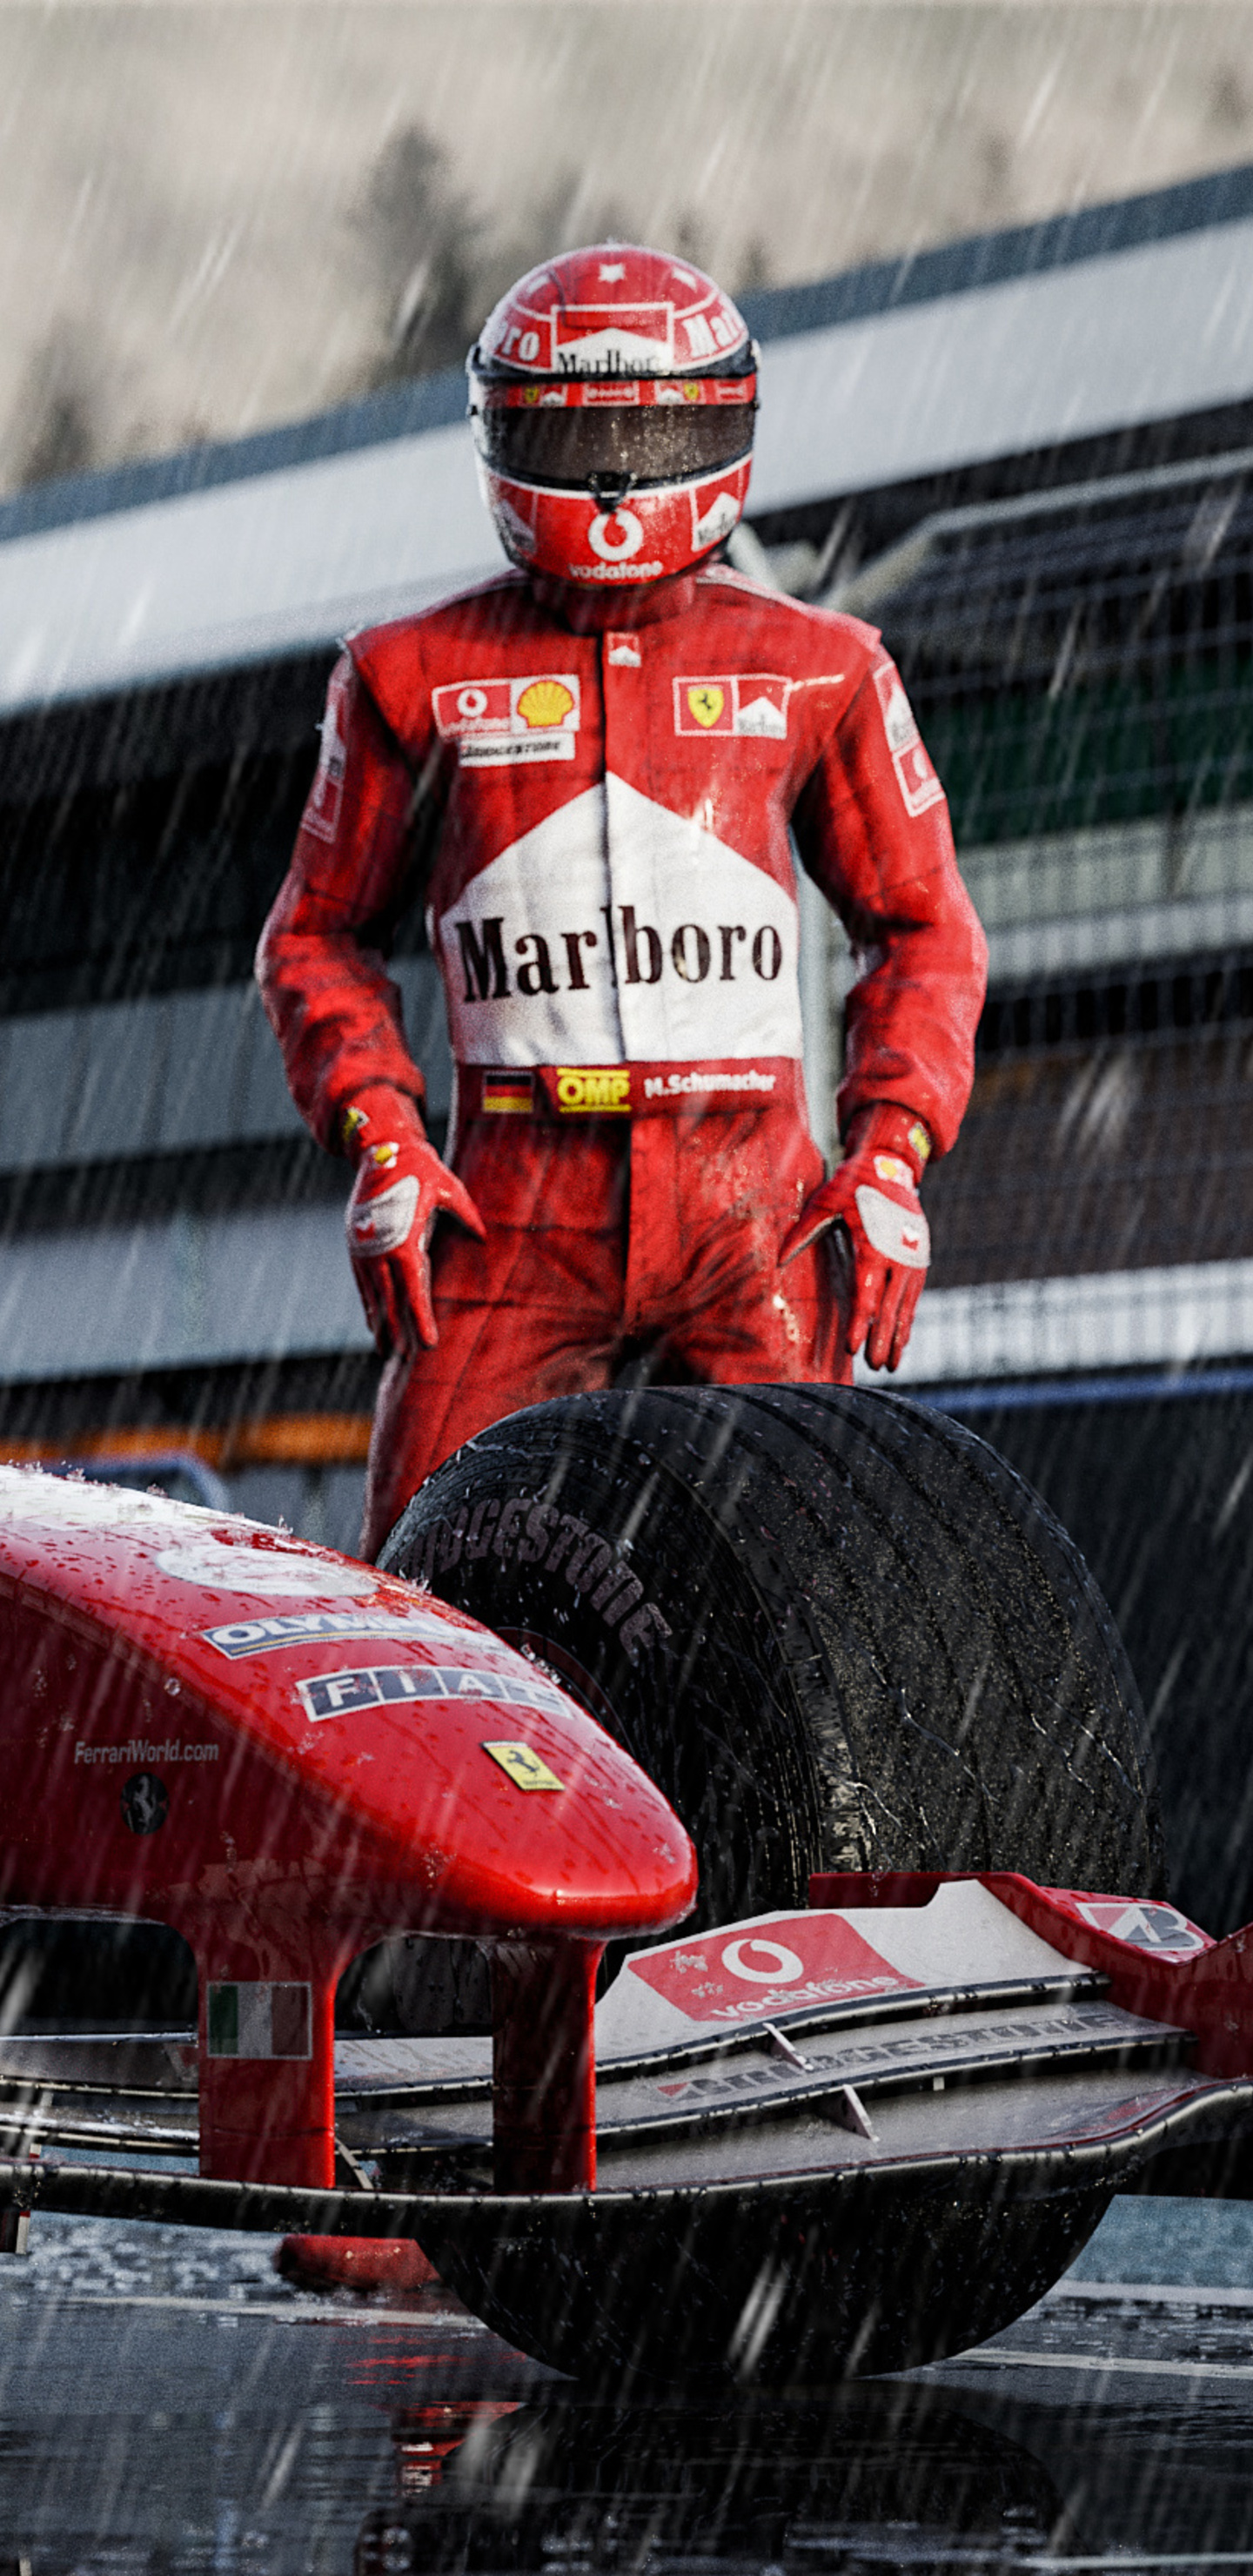 1440x2960 Ferrari F2004 Michael Schumacher Samsung Galaxy Note 9,8,  S9,S8,S8+ QHD HD 4k Wallpapers, Images, Backgrounds, Photos and Pictures